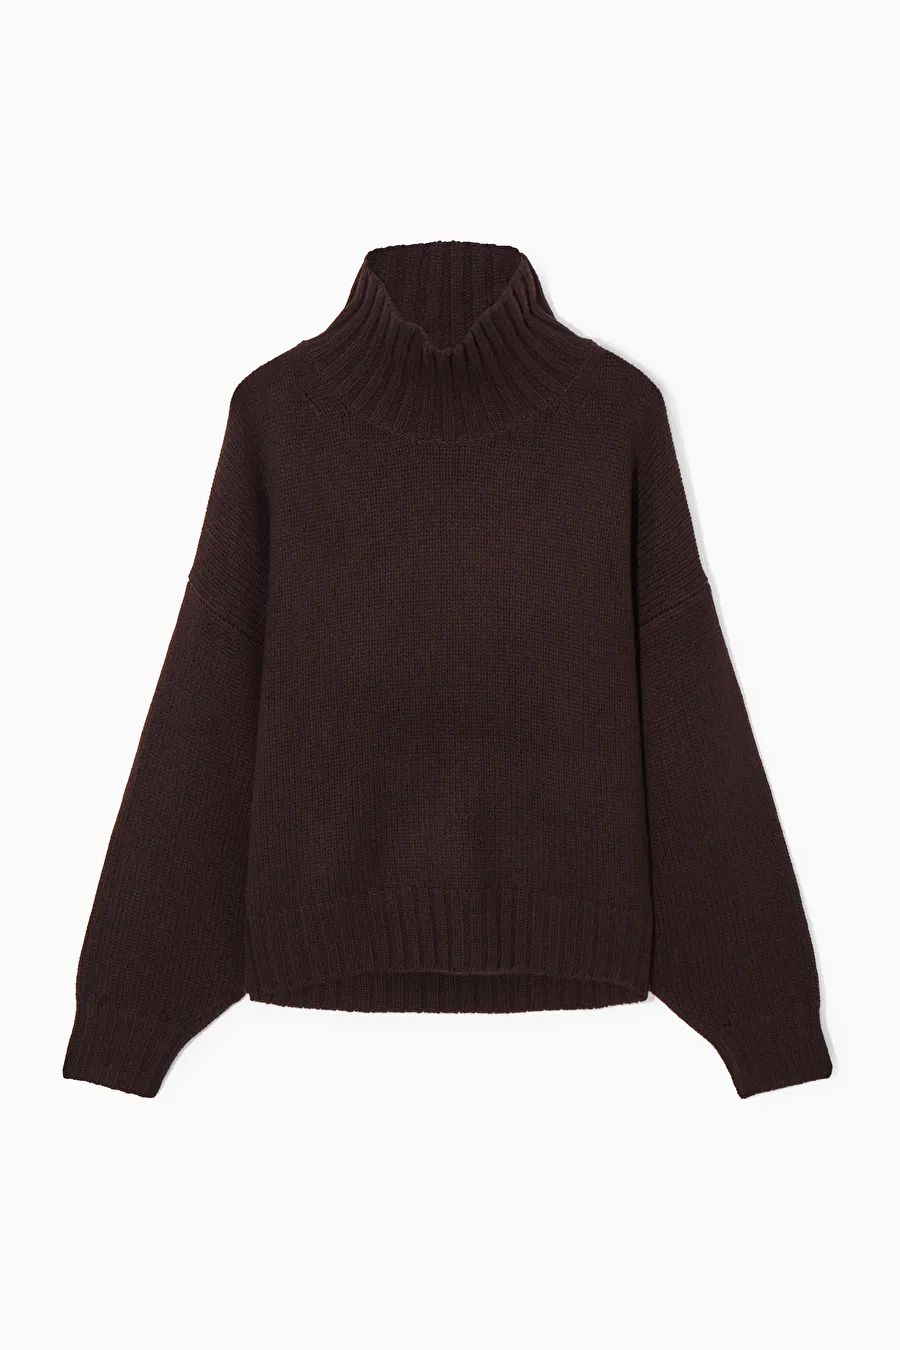 CHUNKY PURE CASHMERE TURTLENECK JUMPER - DARK BROWN - COS | COS UK